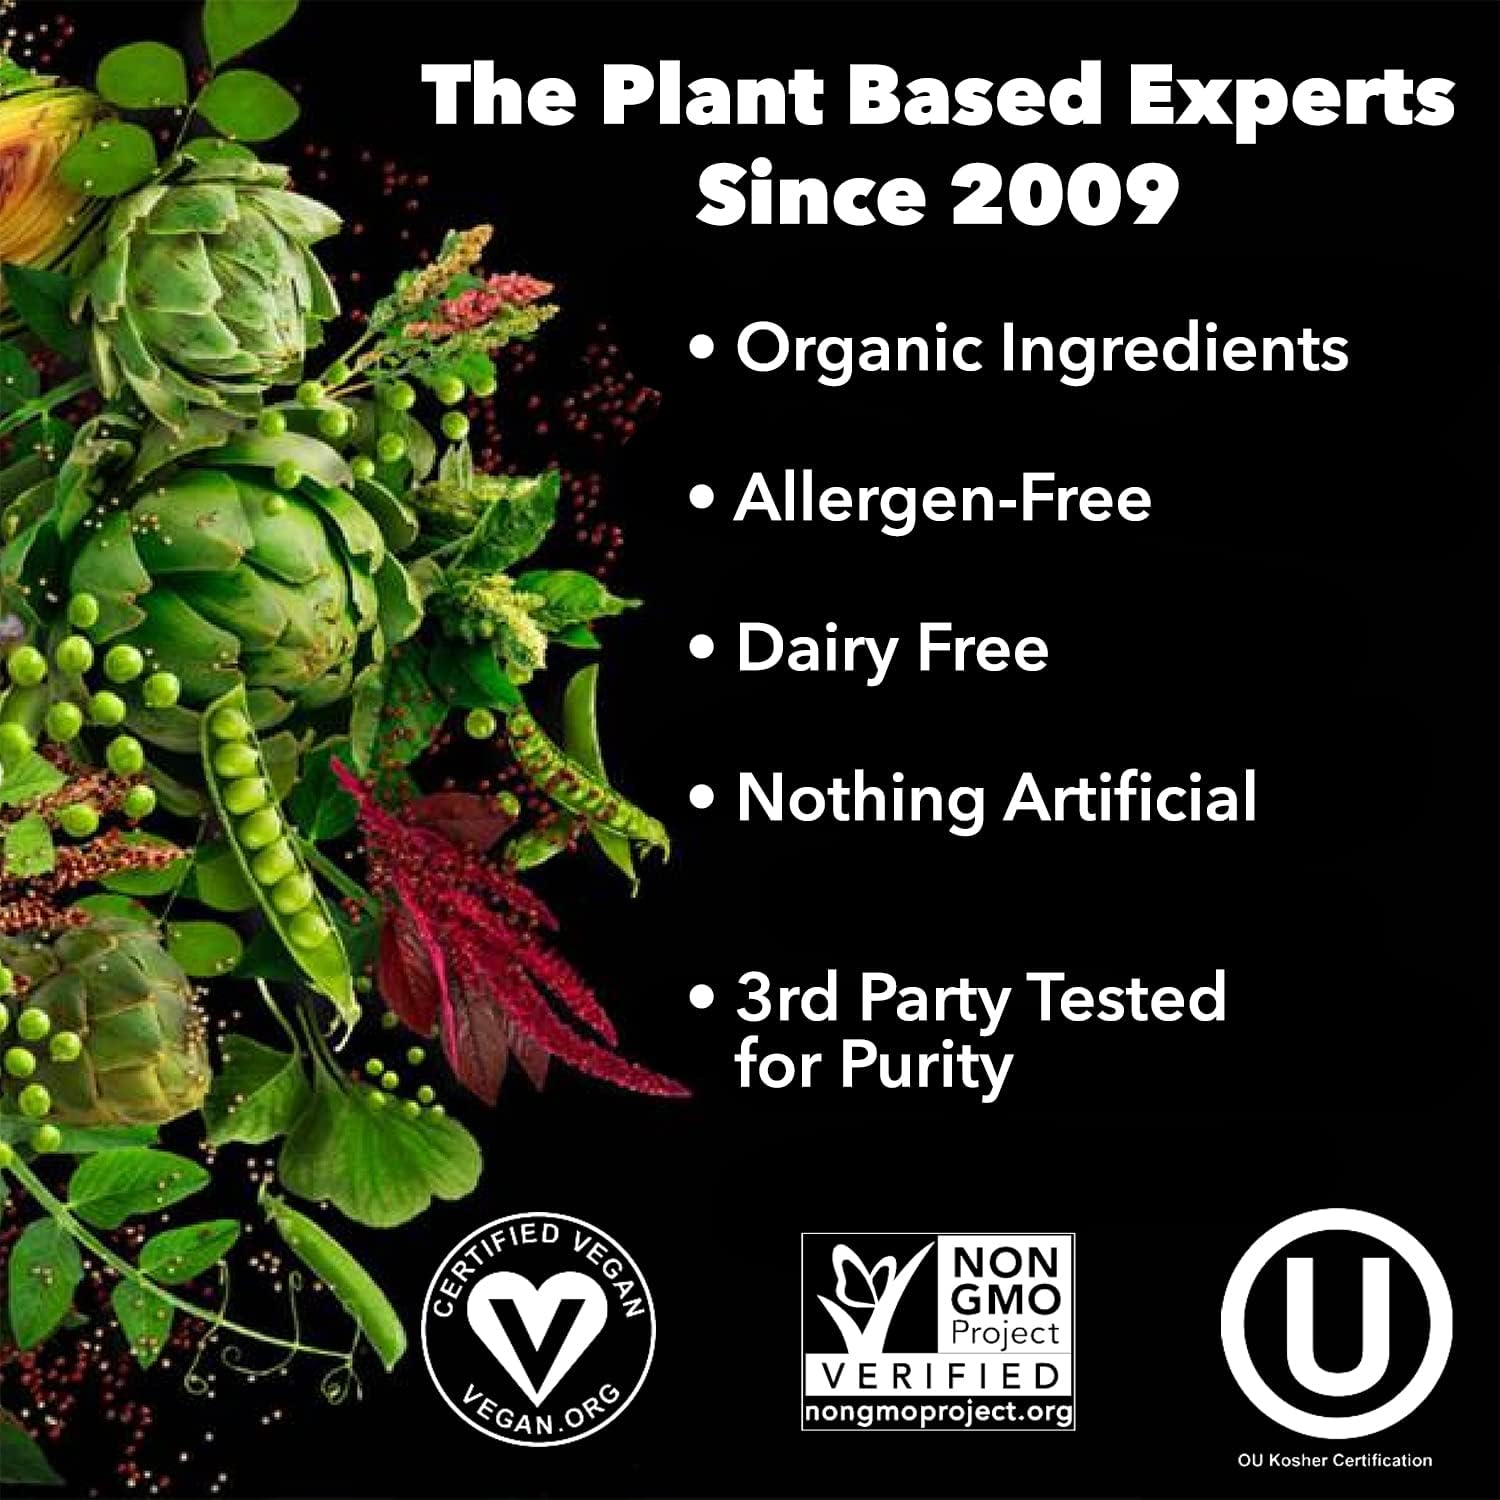 PlantFusion Complete Vegan Protein Powder - Plant Based With BCAAs, Digestive Enzymes and Pea Protein - Keto, Gluten Free, Soy Free, Non-Dairy, No Sugar, Non-GMO - Chocolate 2 lb